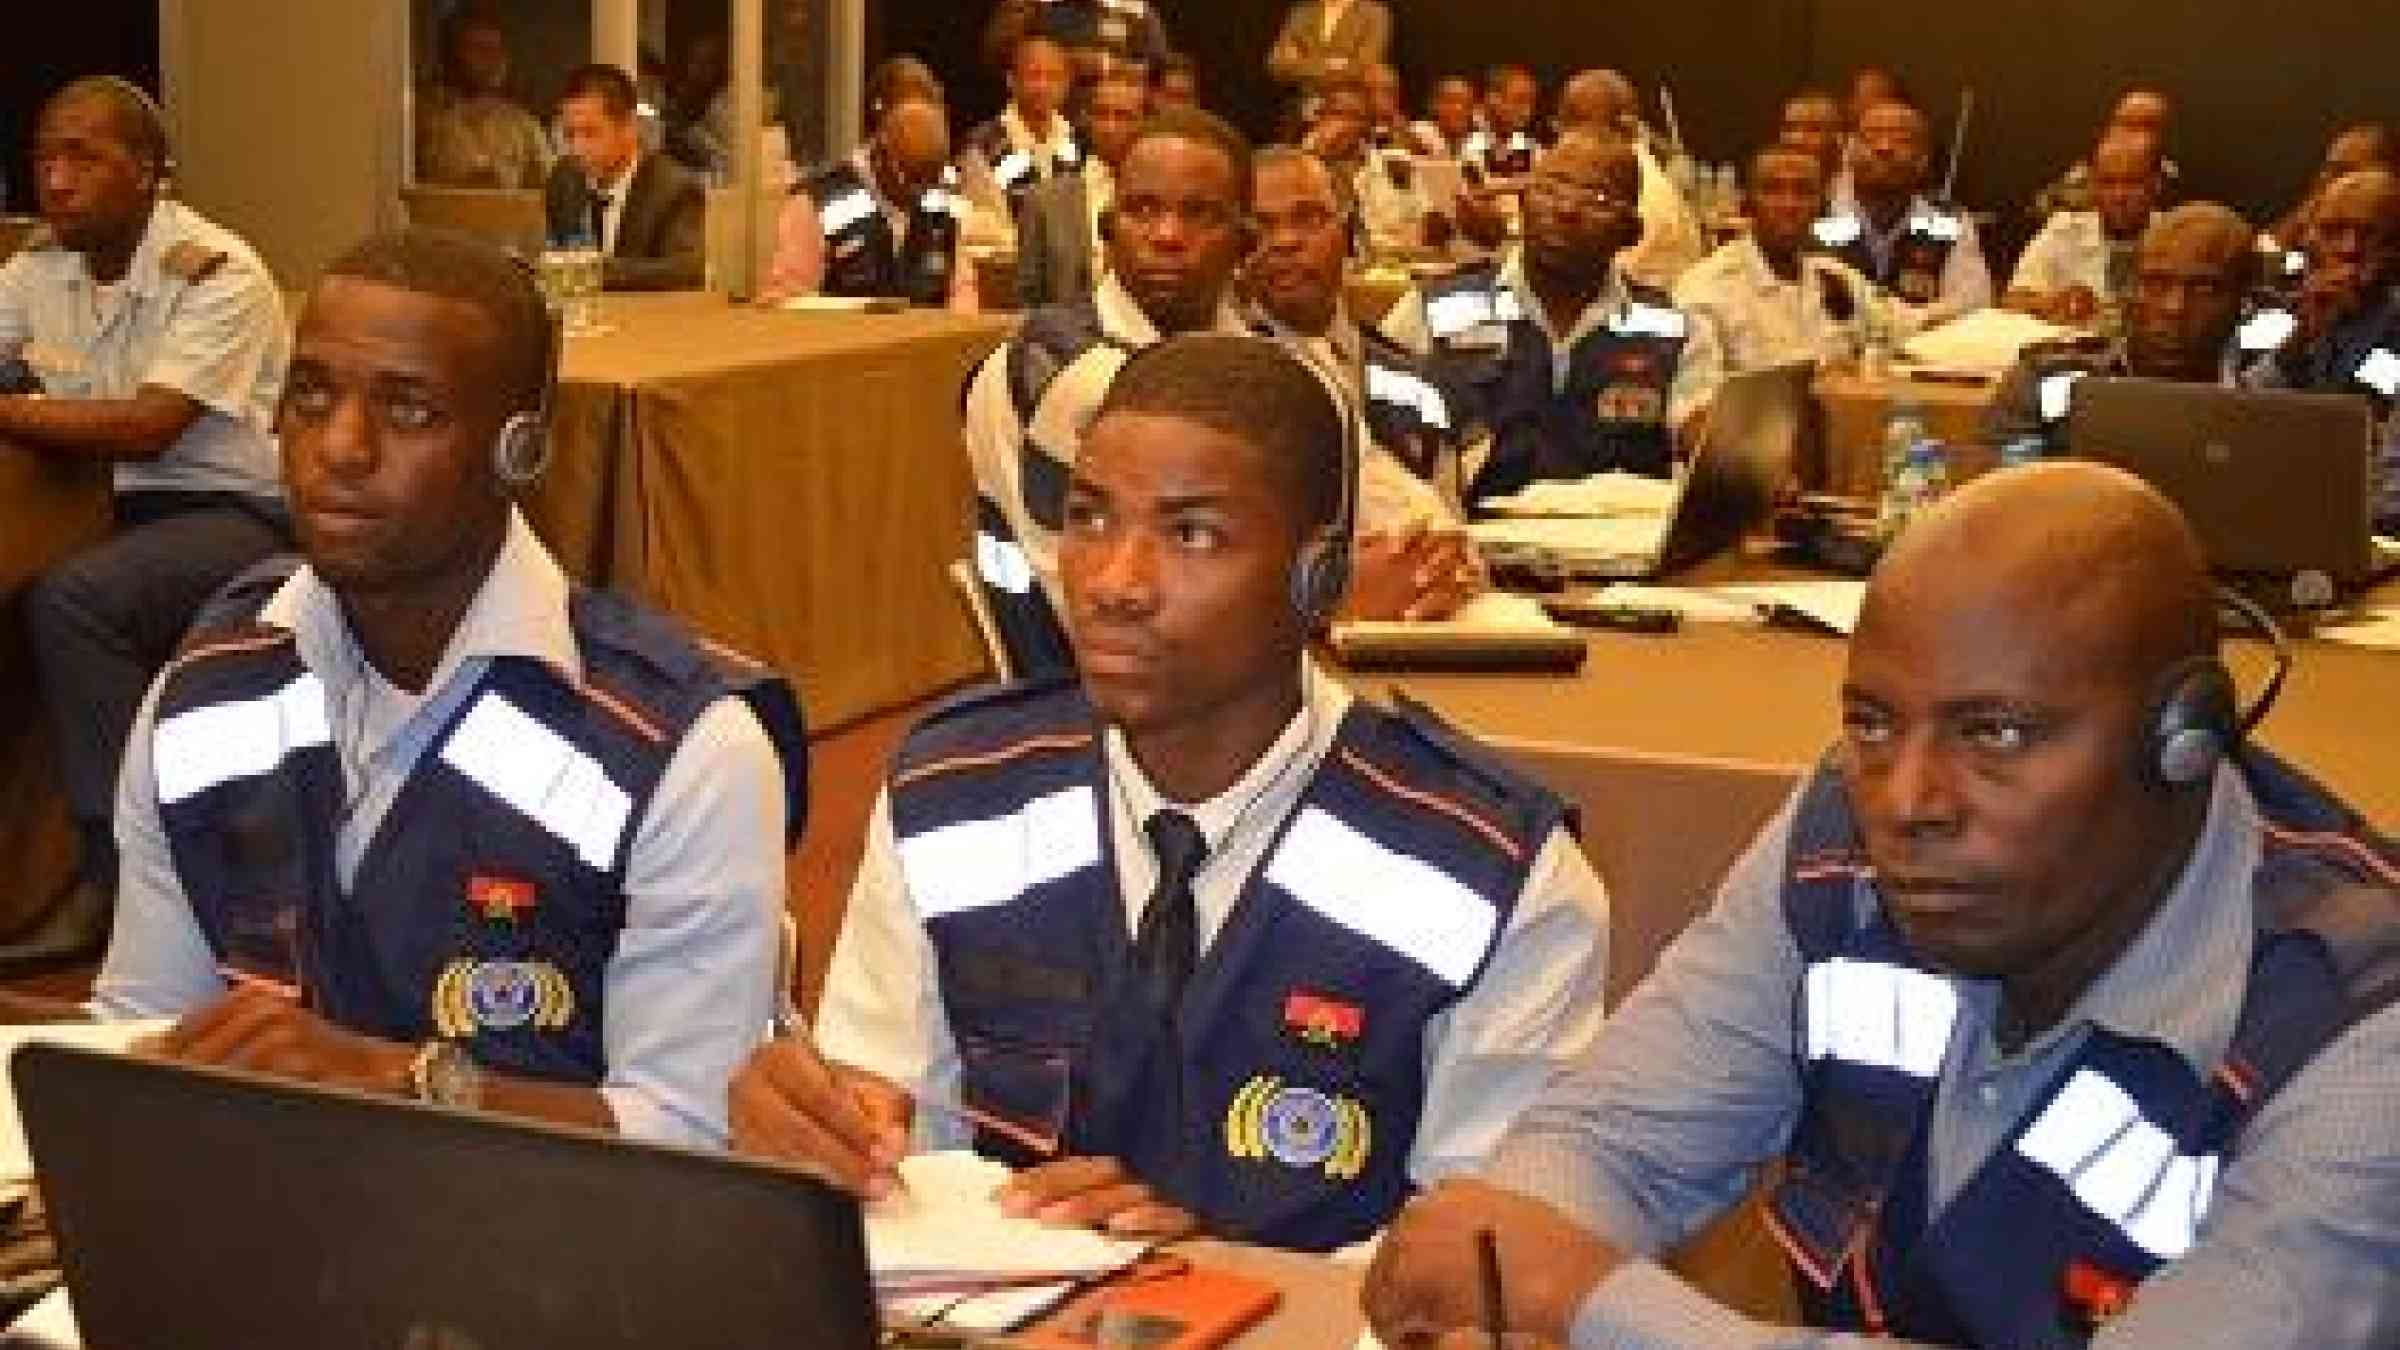 Staff from the Angolan Civil Protection Service listen to a presentation during the disaster loss database event in their country's capital Luanda (Photo: Angolan Civil Protection Service)